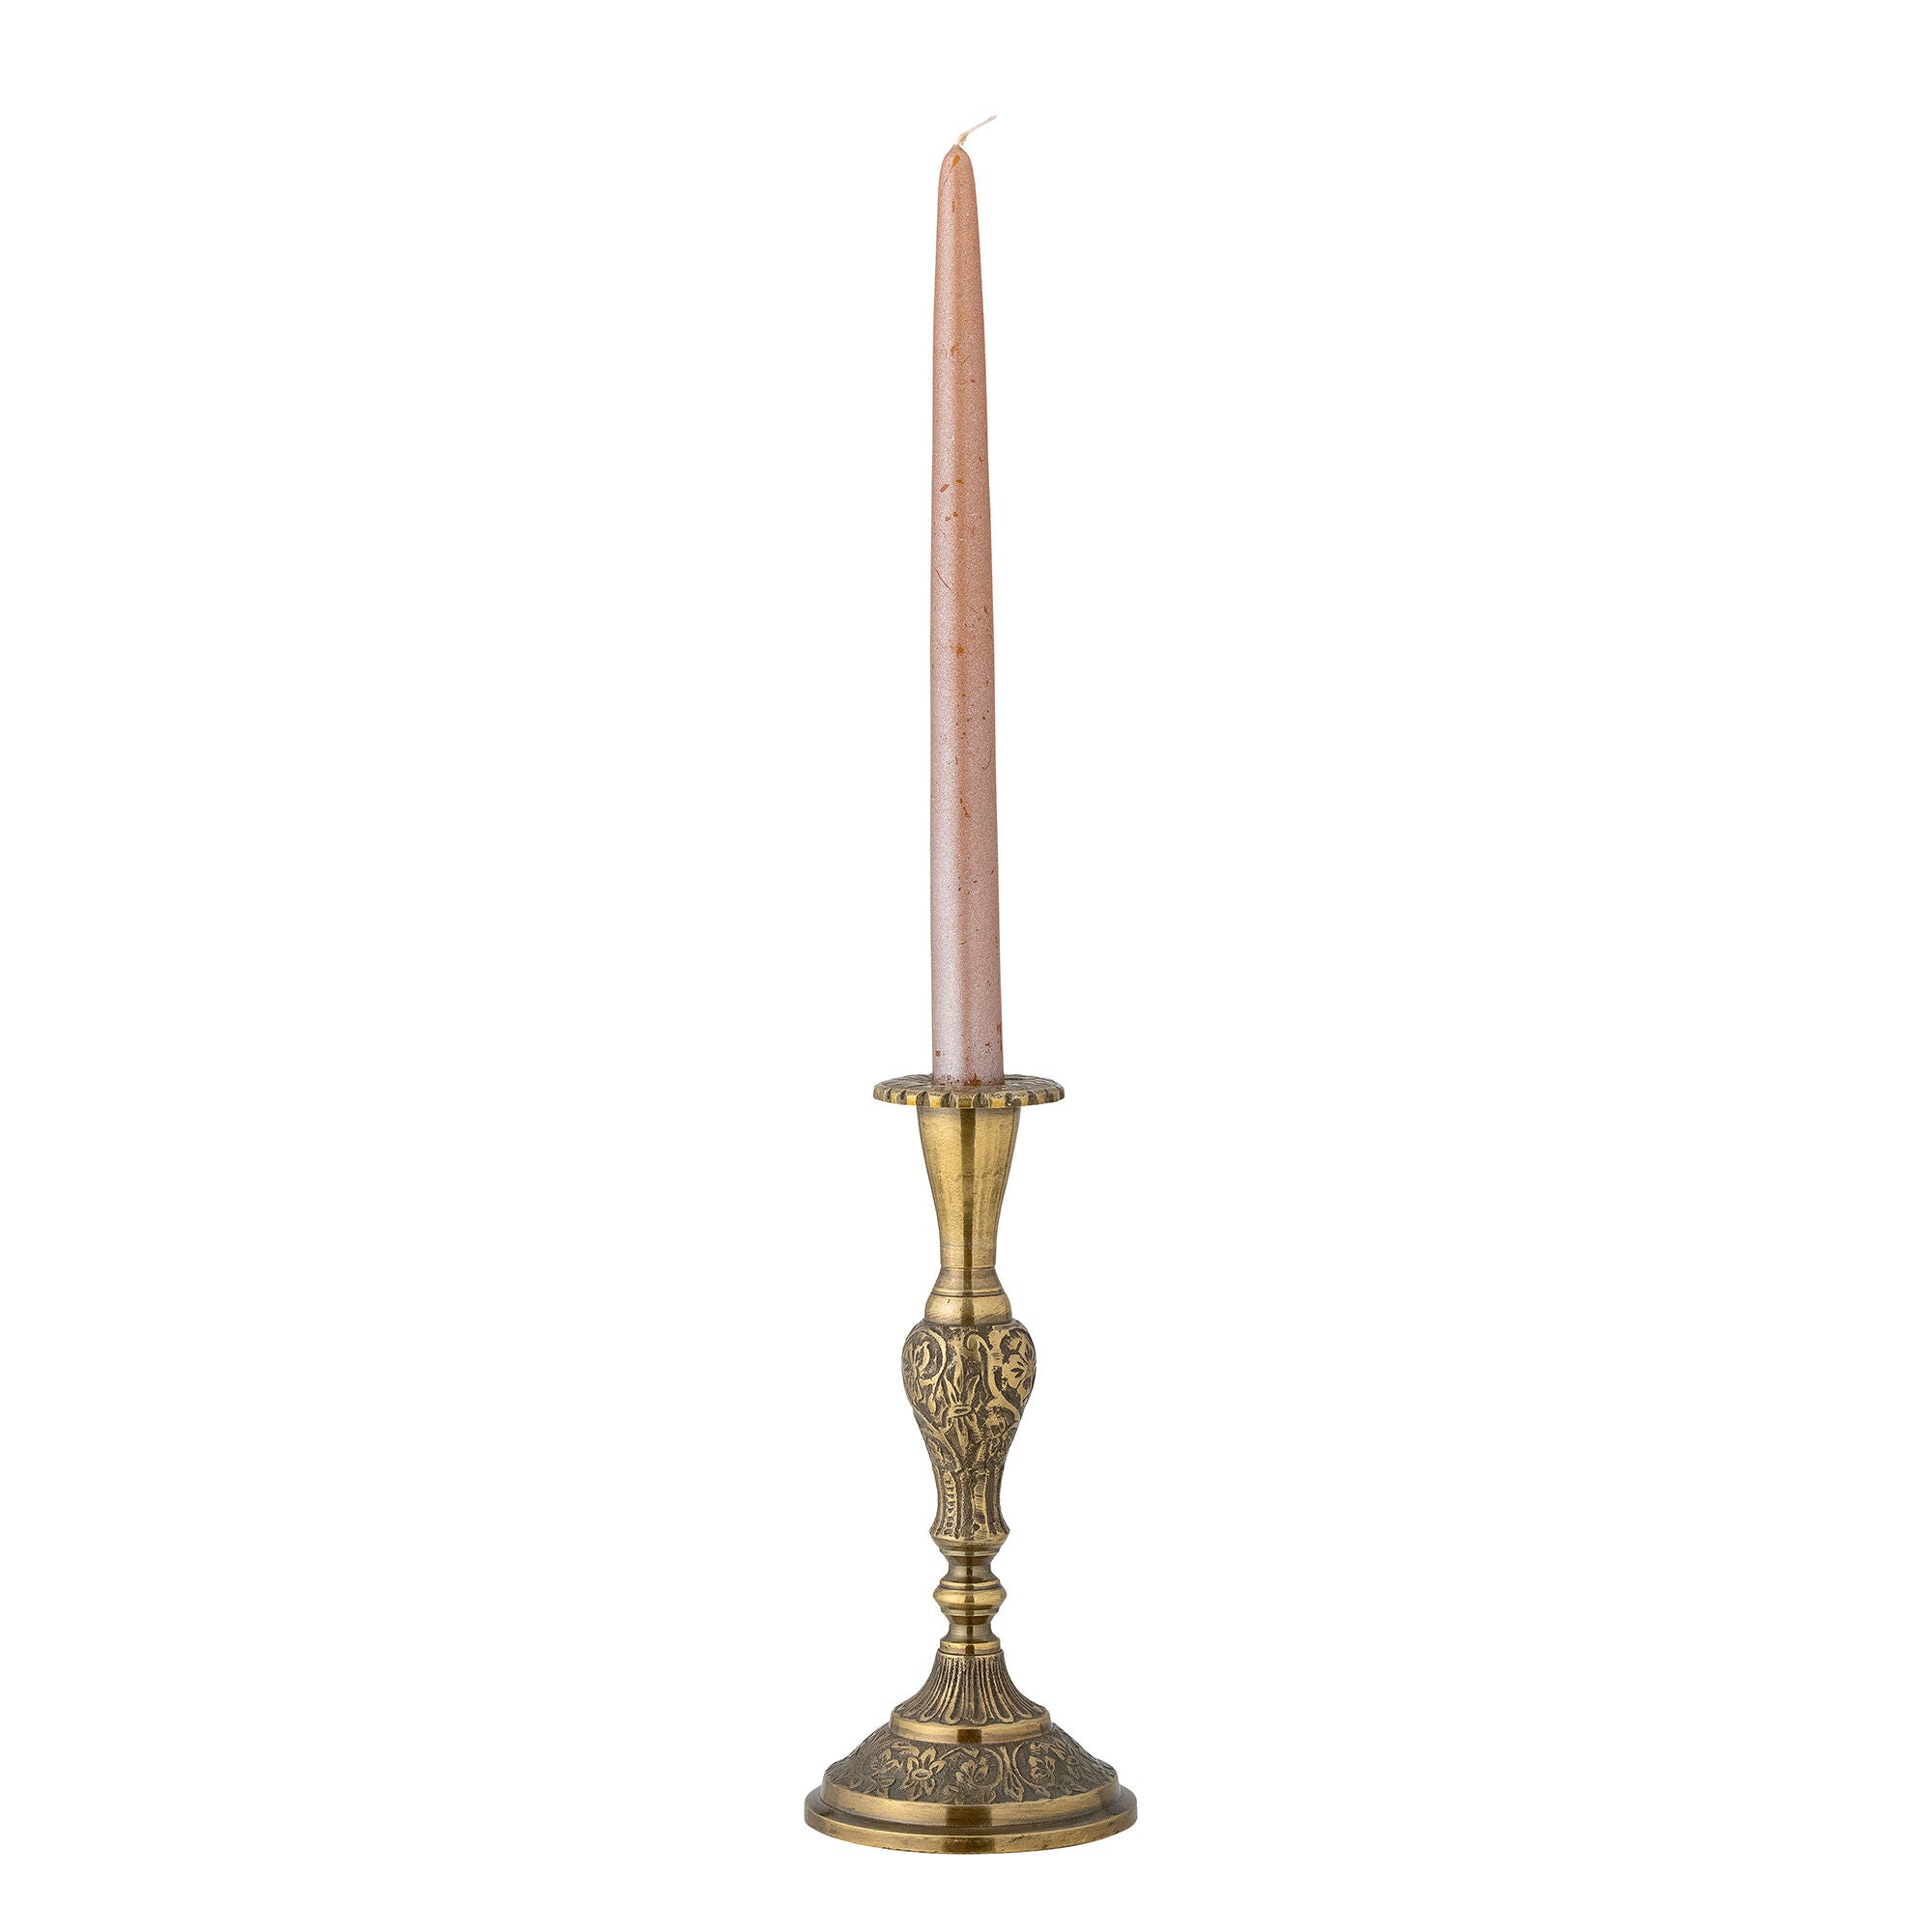 Creative Collection Lenette Candle Holder, Brass, Aluminum